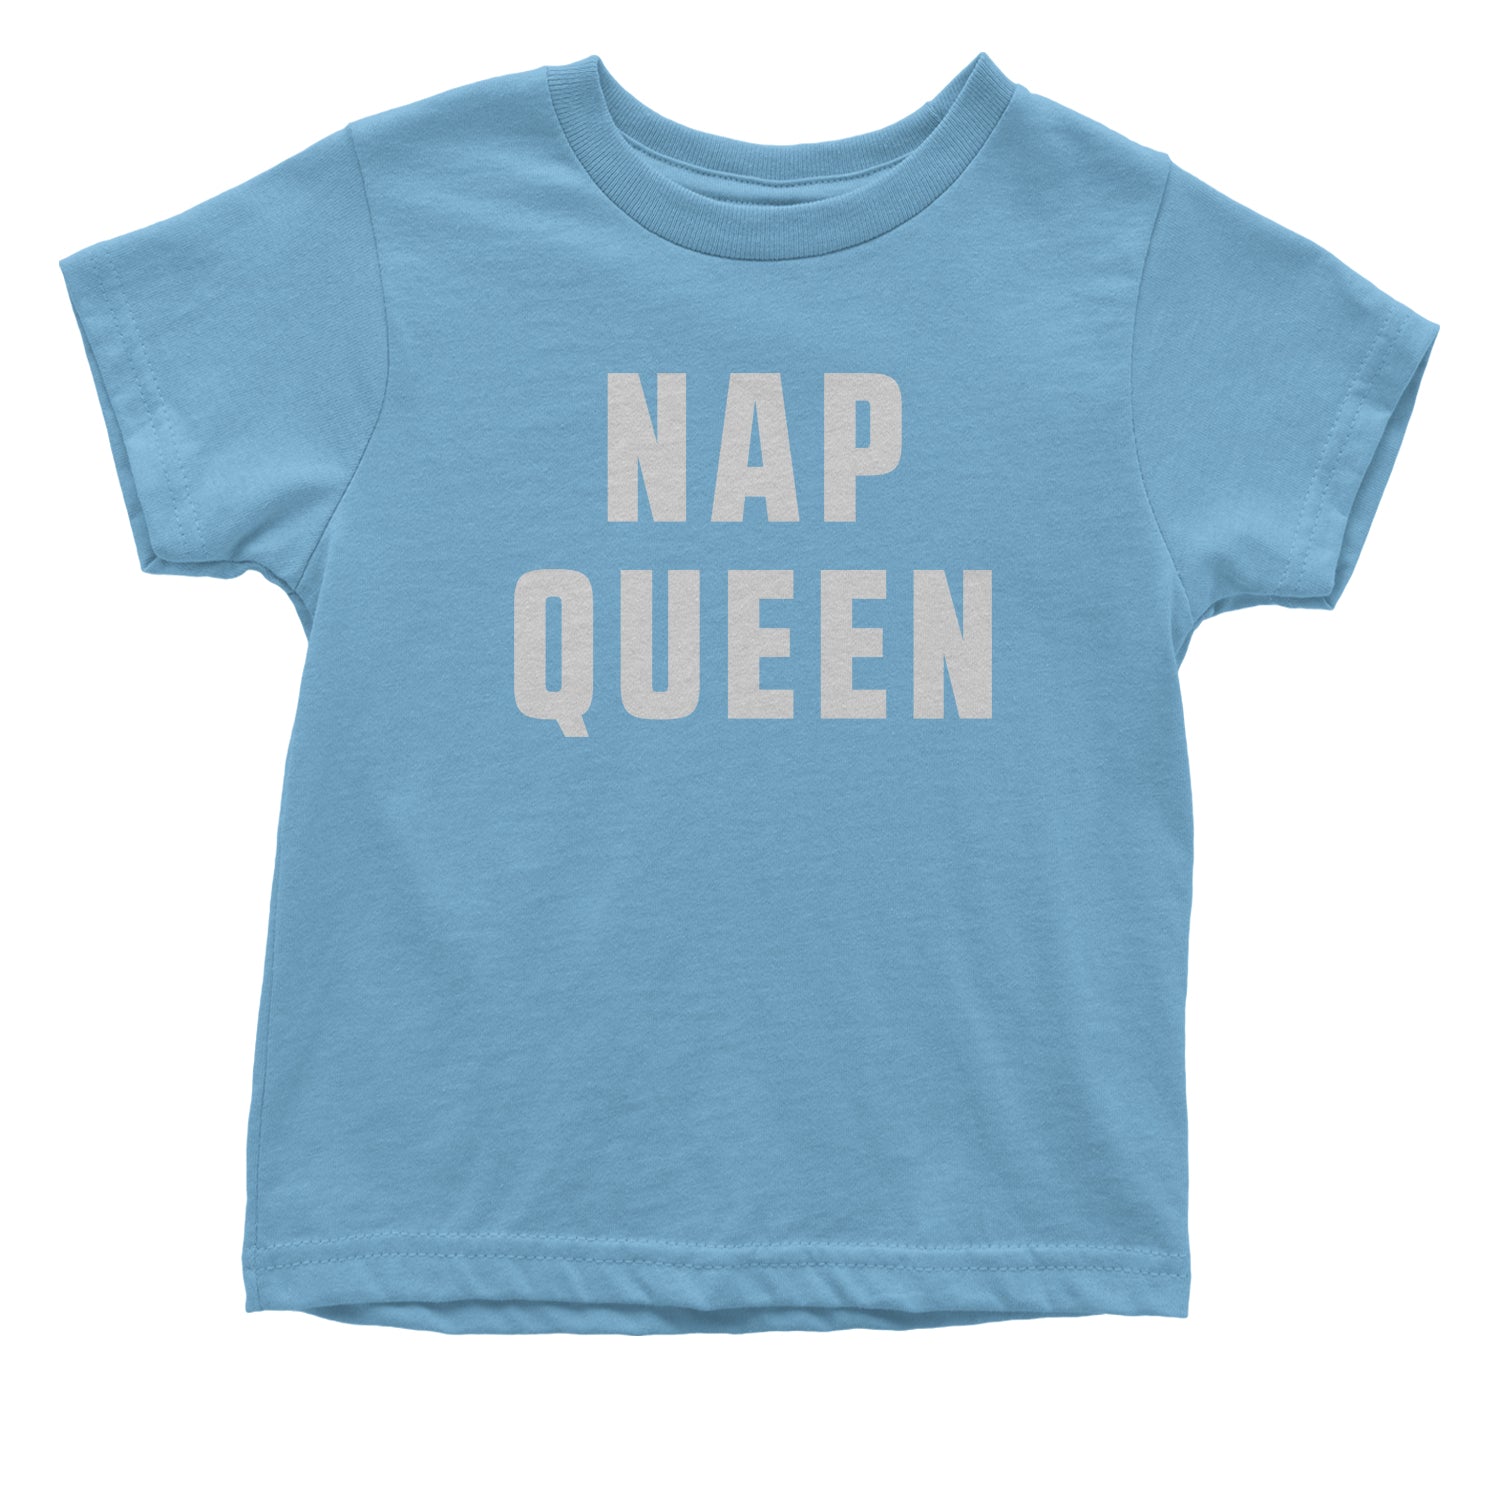 Nap Queen (White Print) Comfy Top For Lazy Days Toddler T-Shirt all, day, function, lazy, nap, pajamas, queen, siesta, sleep, tired, to, too by Expression Tees